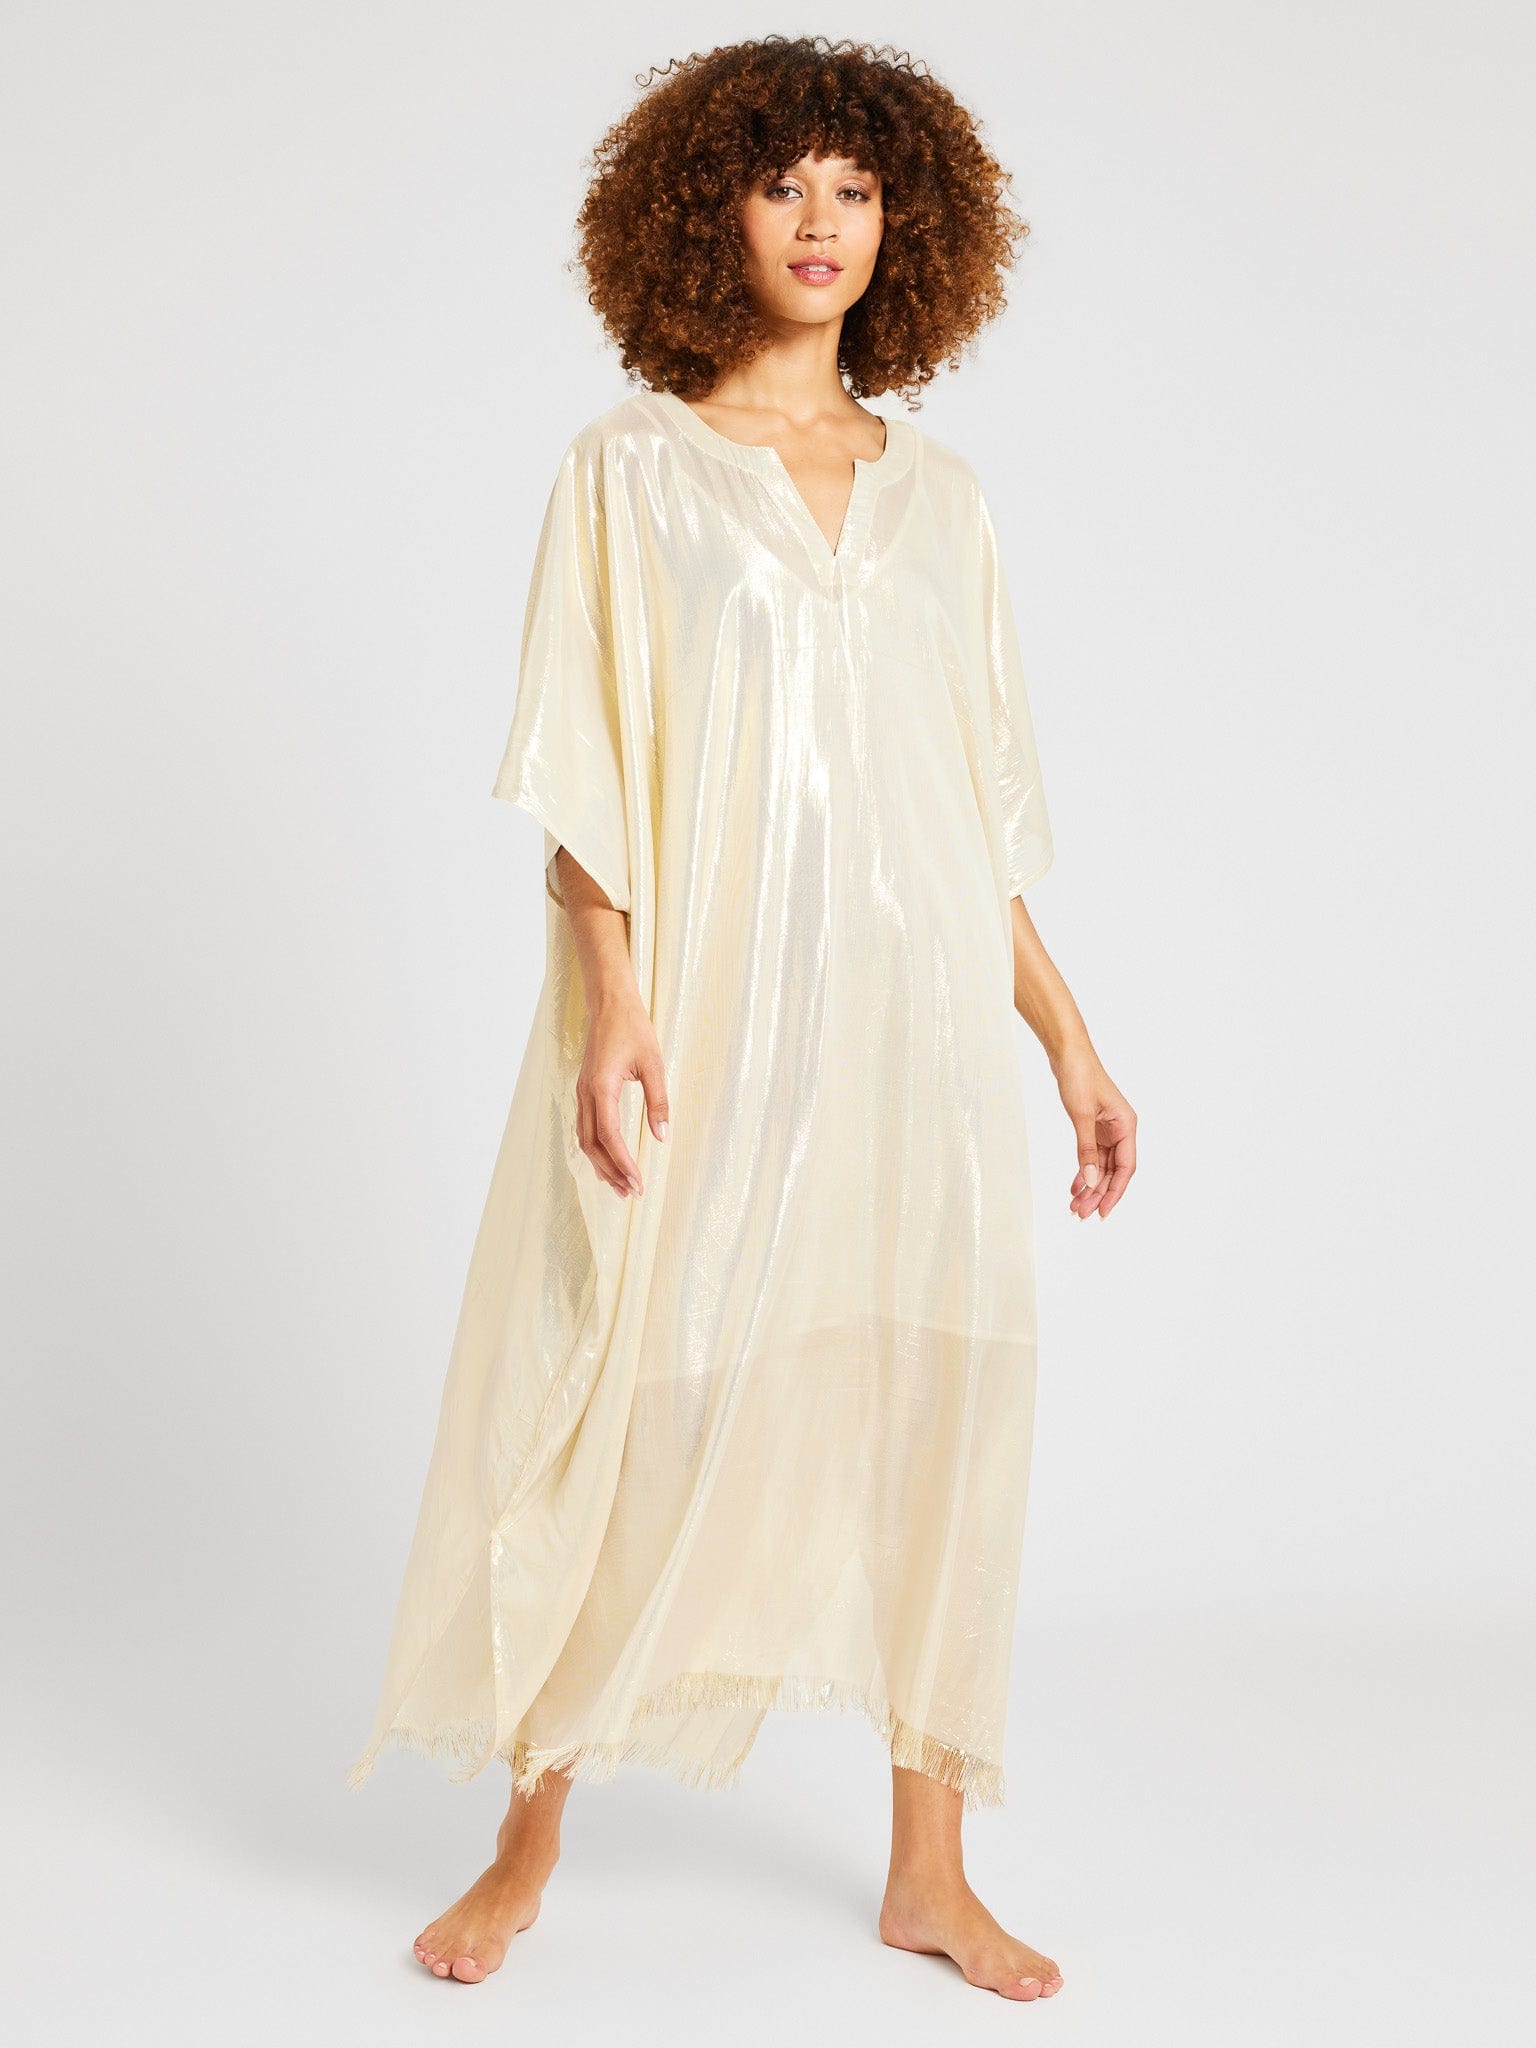 MILLE Clothing Beverly Caftan Gold Lamé